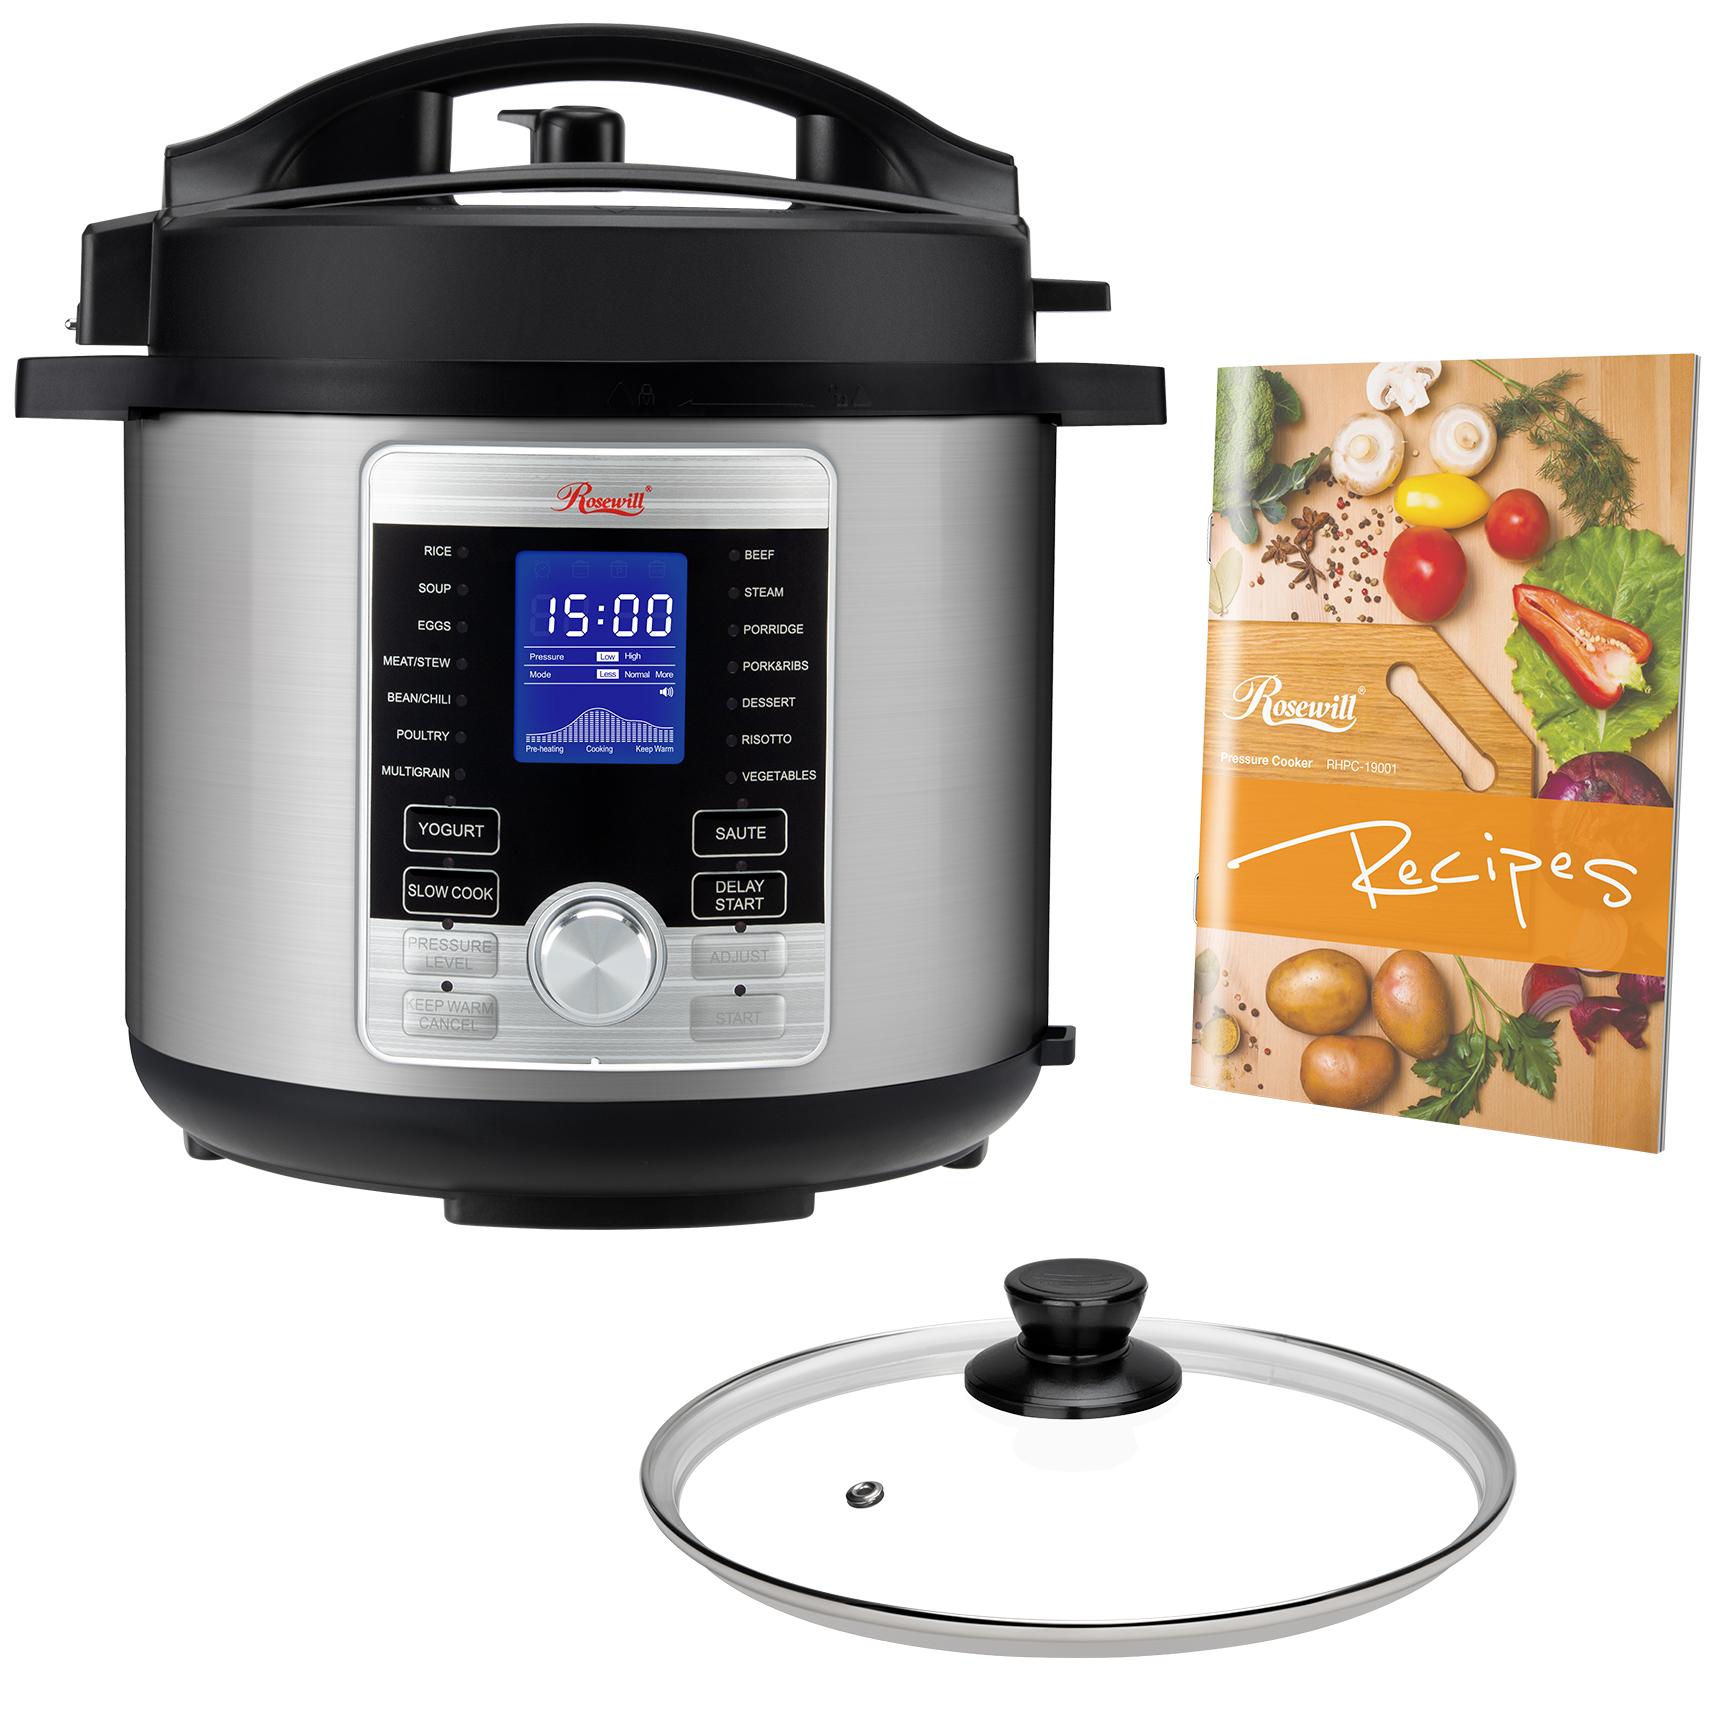 Rosewill 6QT Programmable Pressure Cooker for $34.99 Shipped